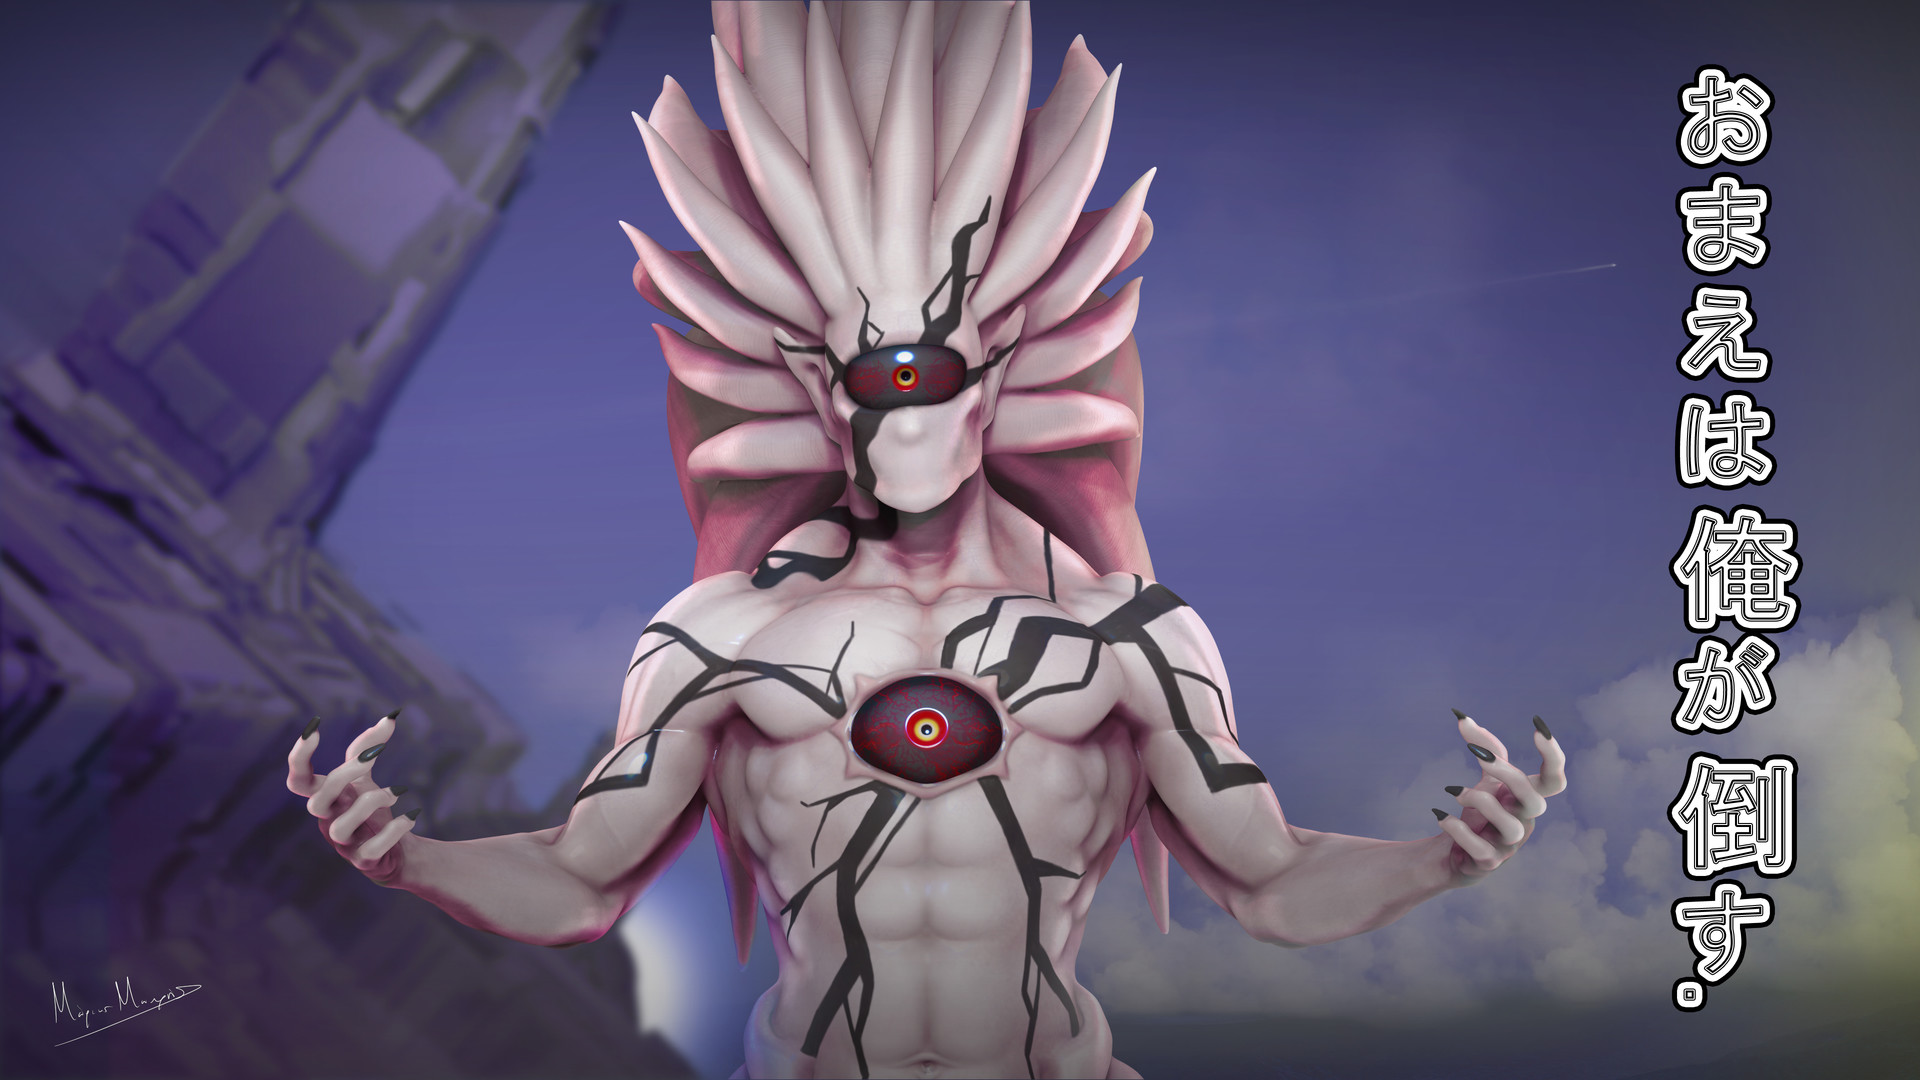 Marios Makris One Punch Man Lord Boros - Boros One Punch Man Action Figure , HD Wallpaper & Backgrounds